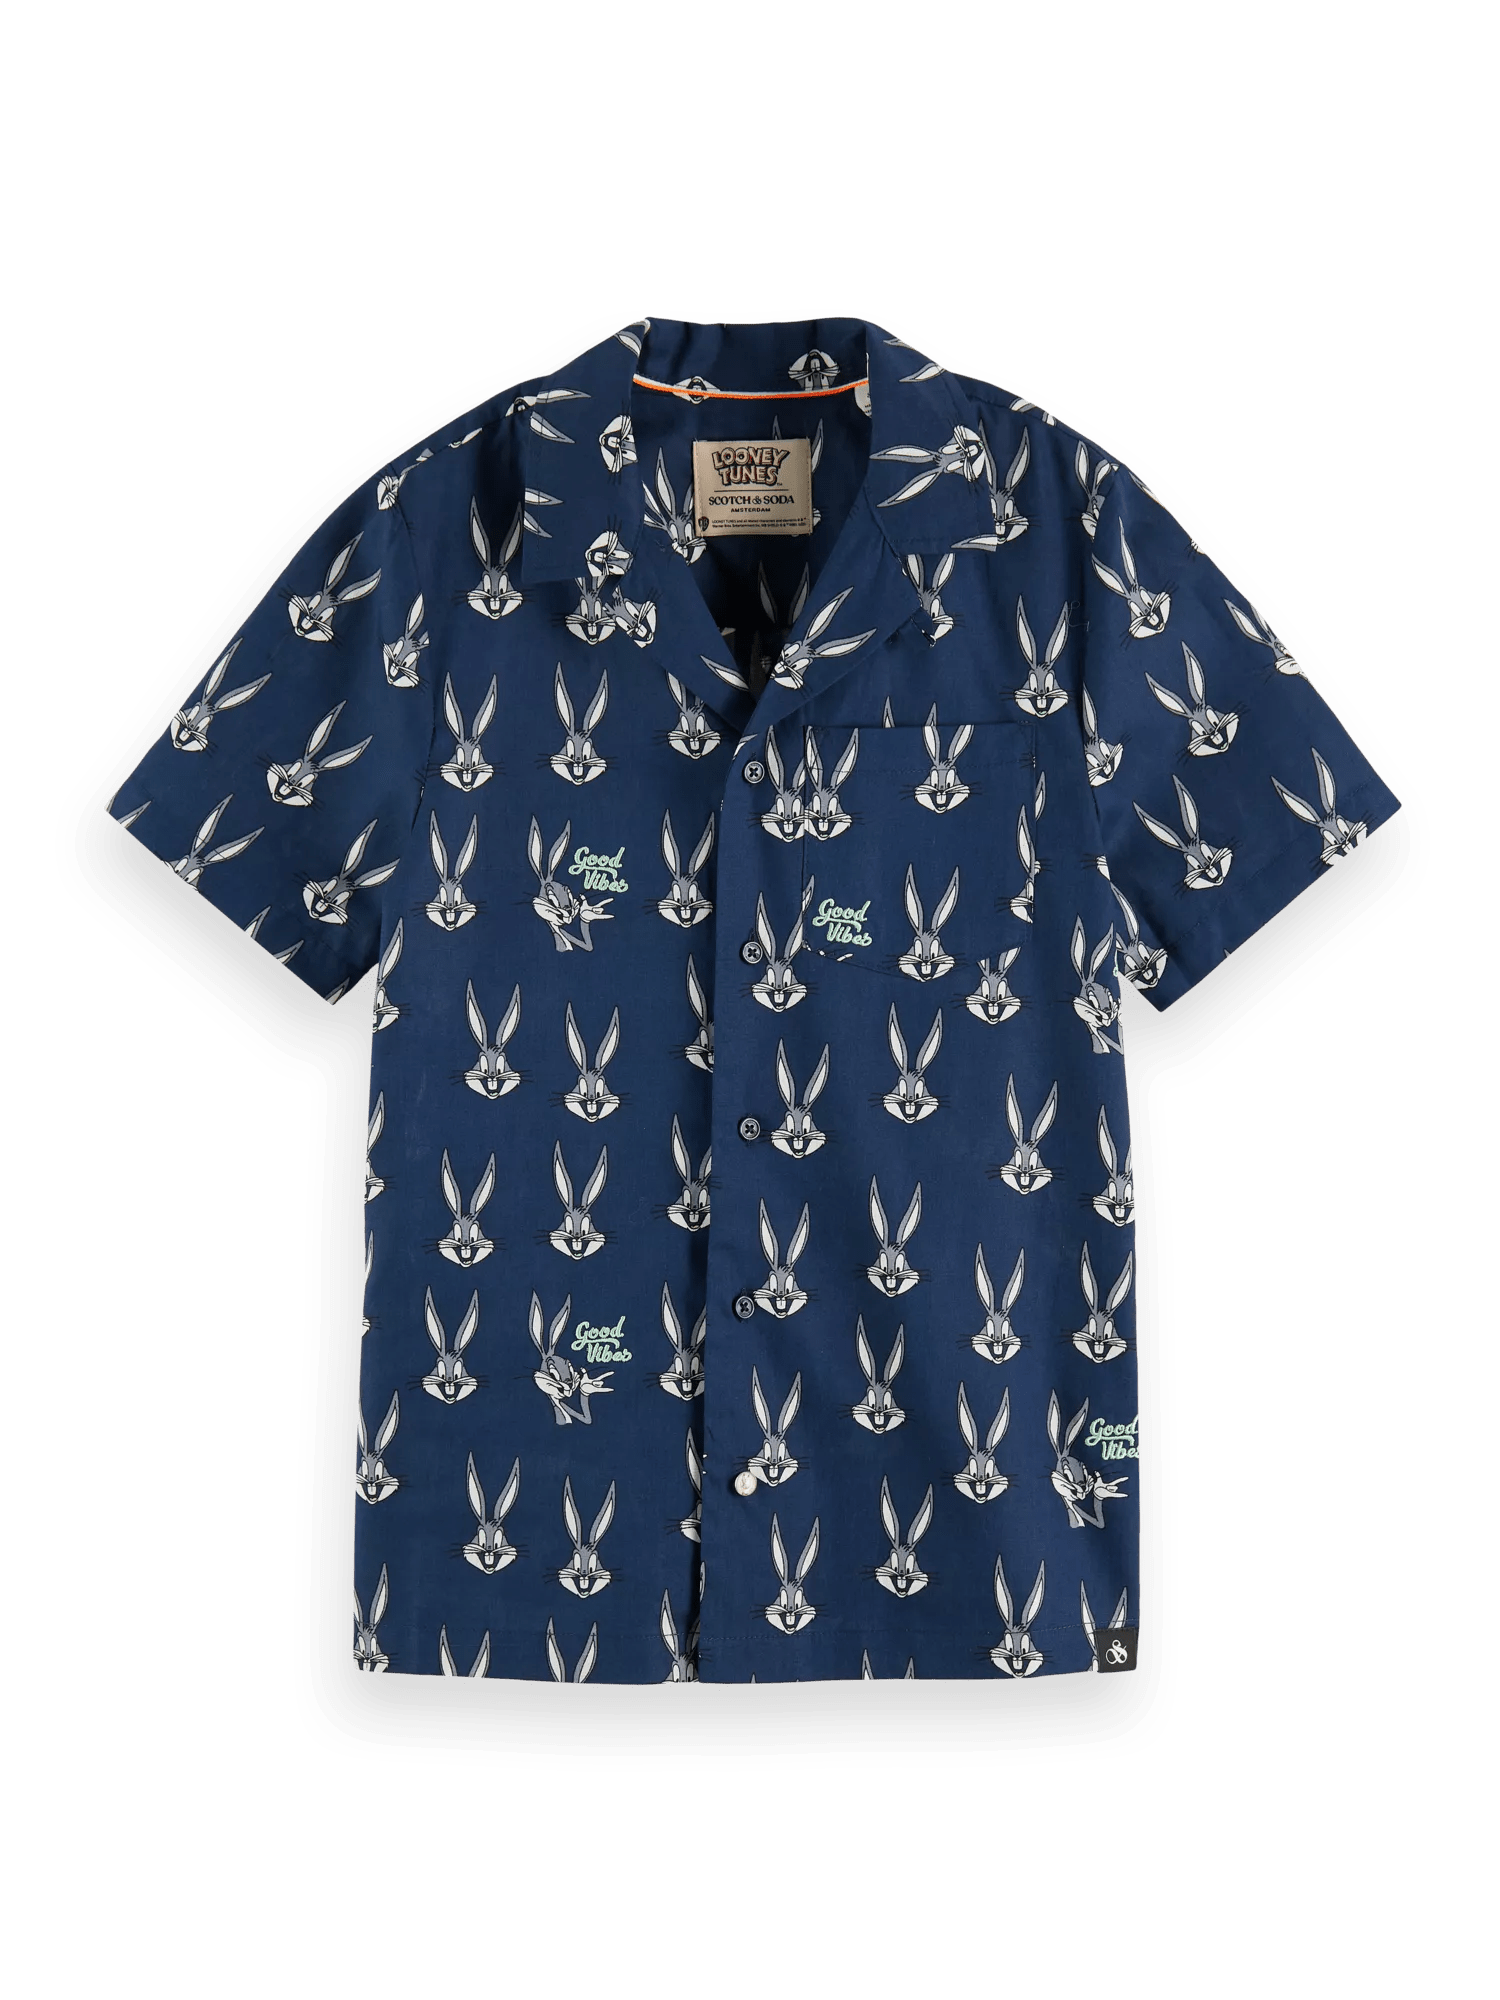 Scotch & Soda BUGS BUNNY - All-over printed short-sleeved shirt FNT